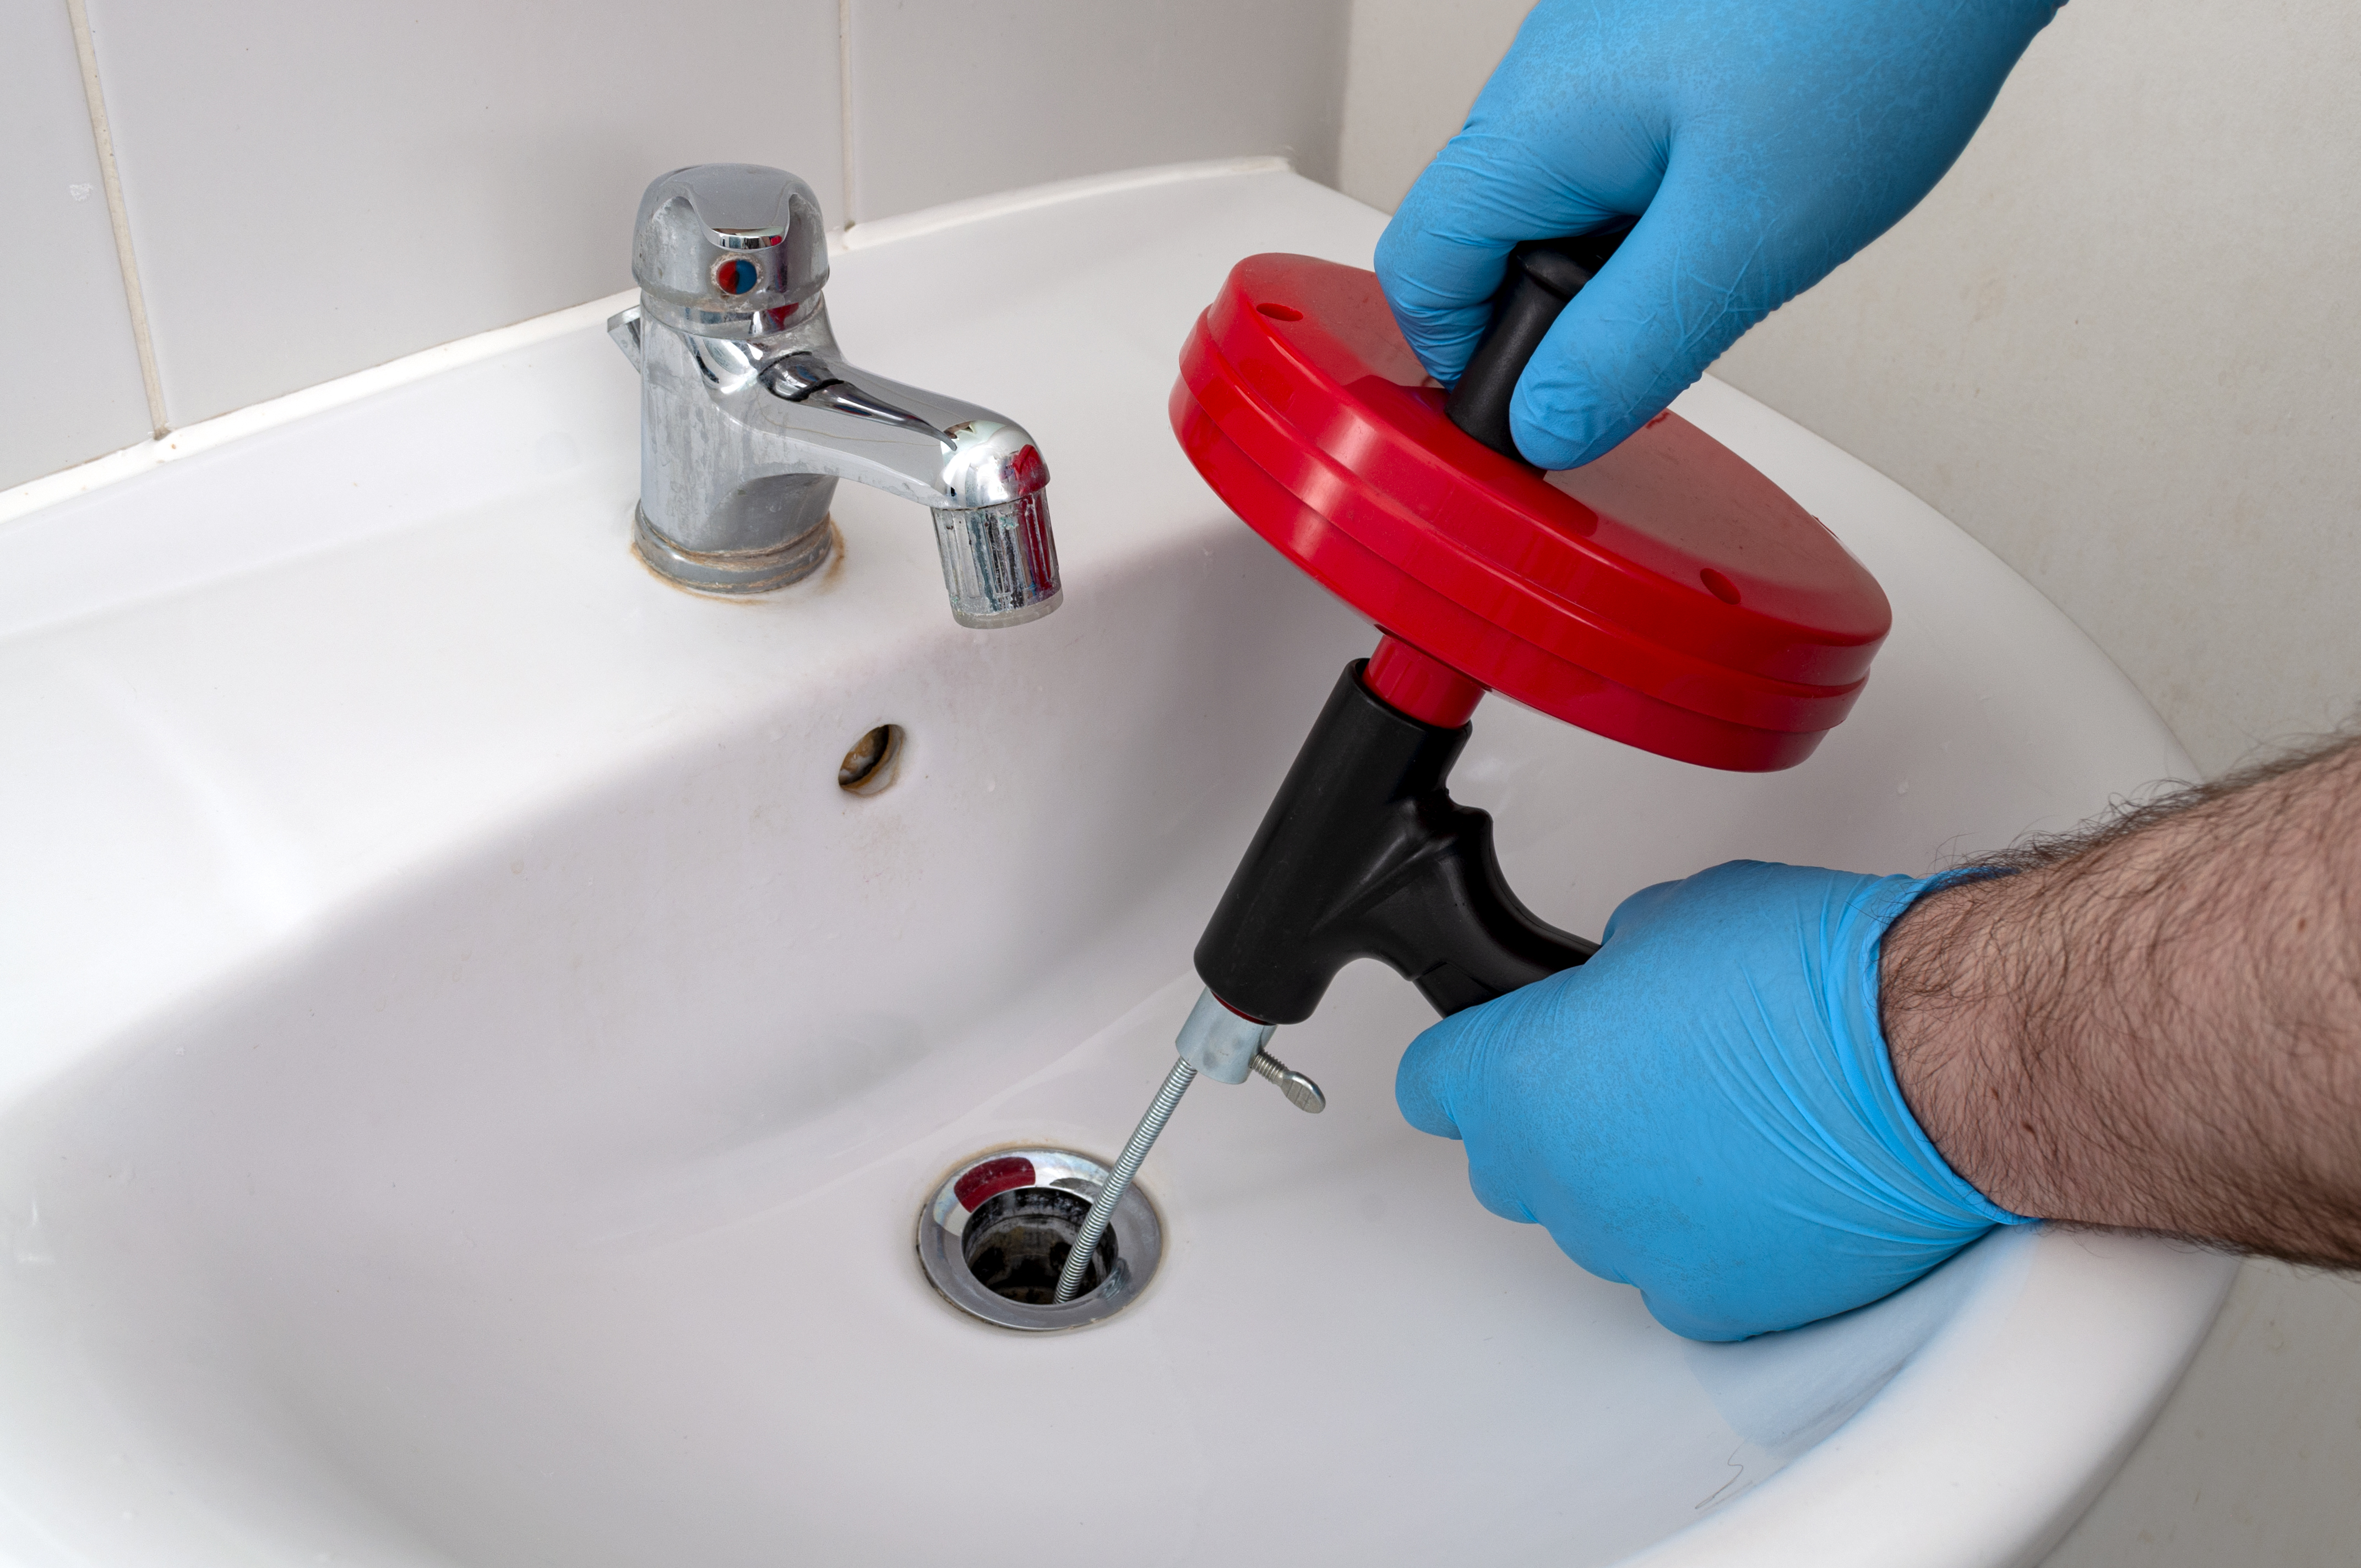 How To Unclog A Toilet With An Auger - DIY Plumbing - The Expert Plumber 